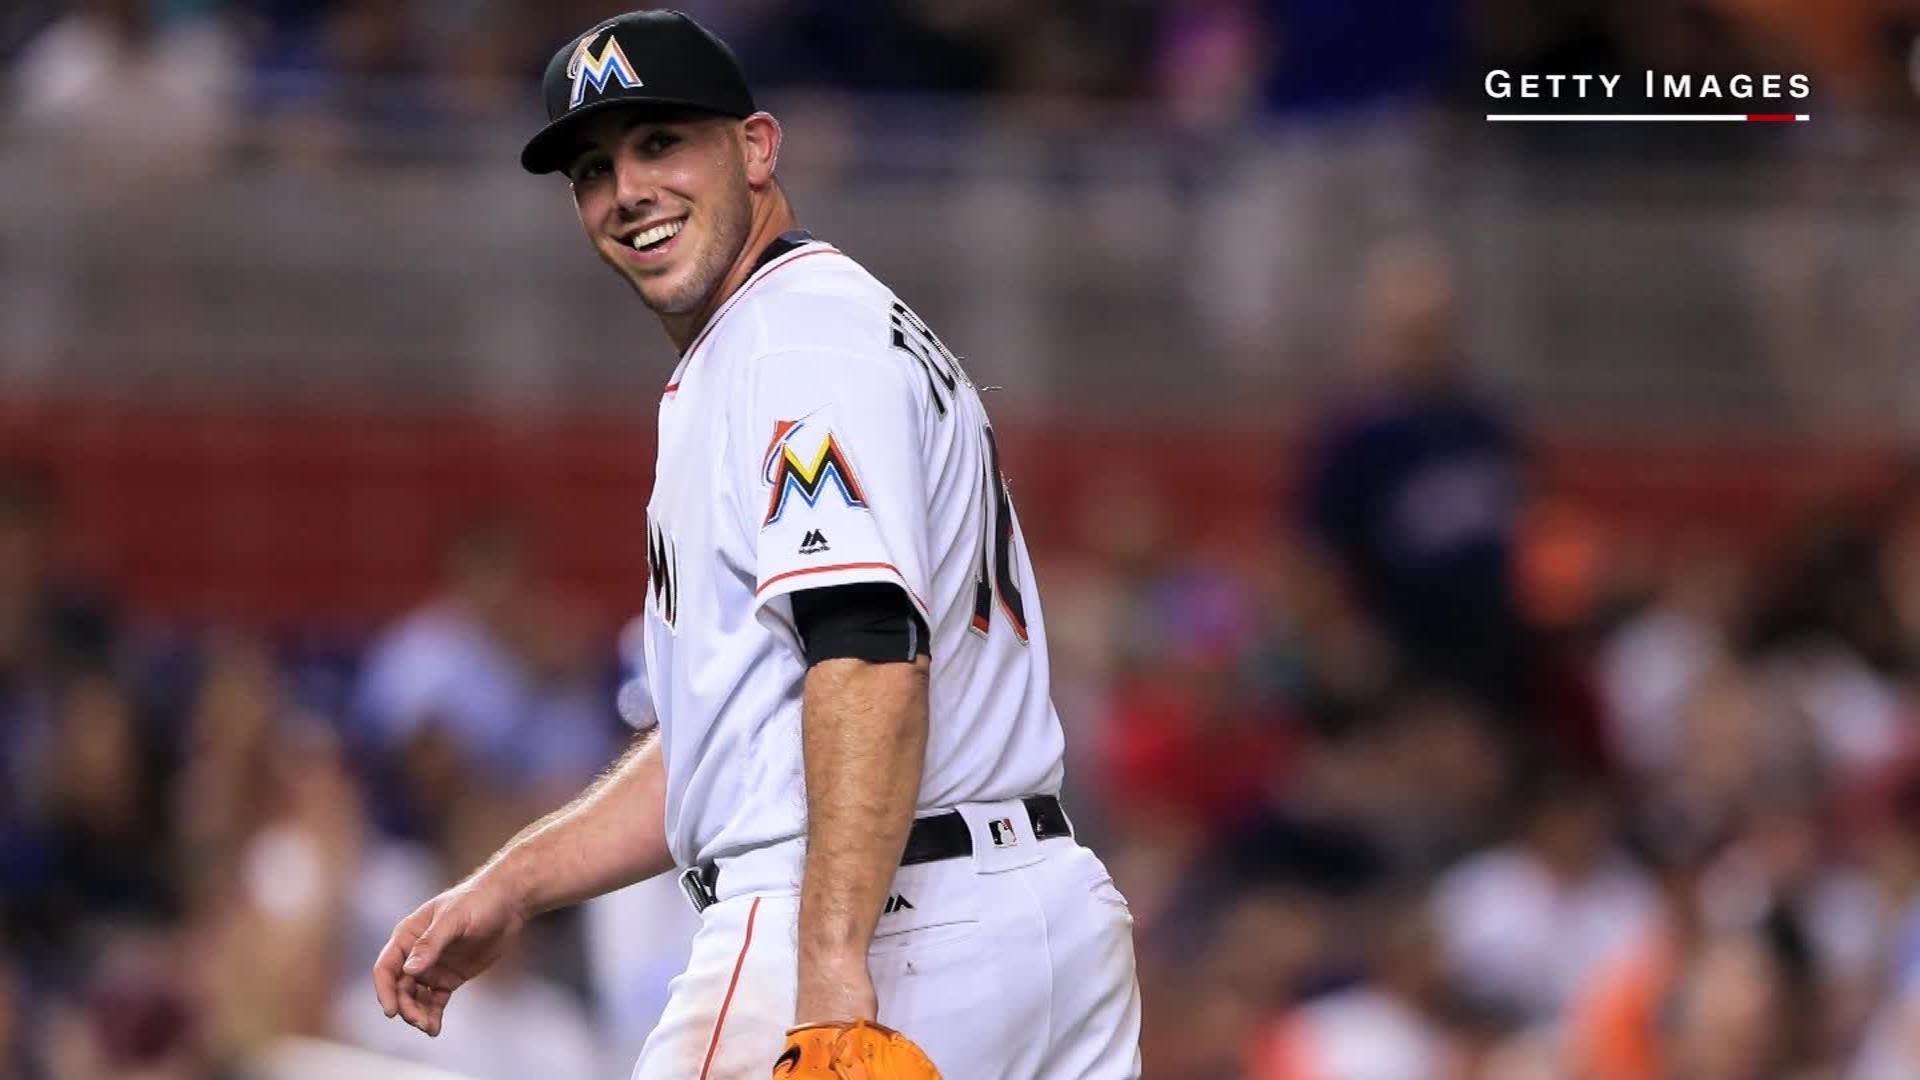 Jose Fernandez once retired 18 straight to lead high school to first state  championship